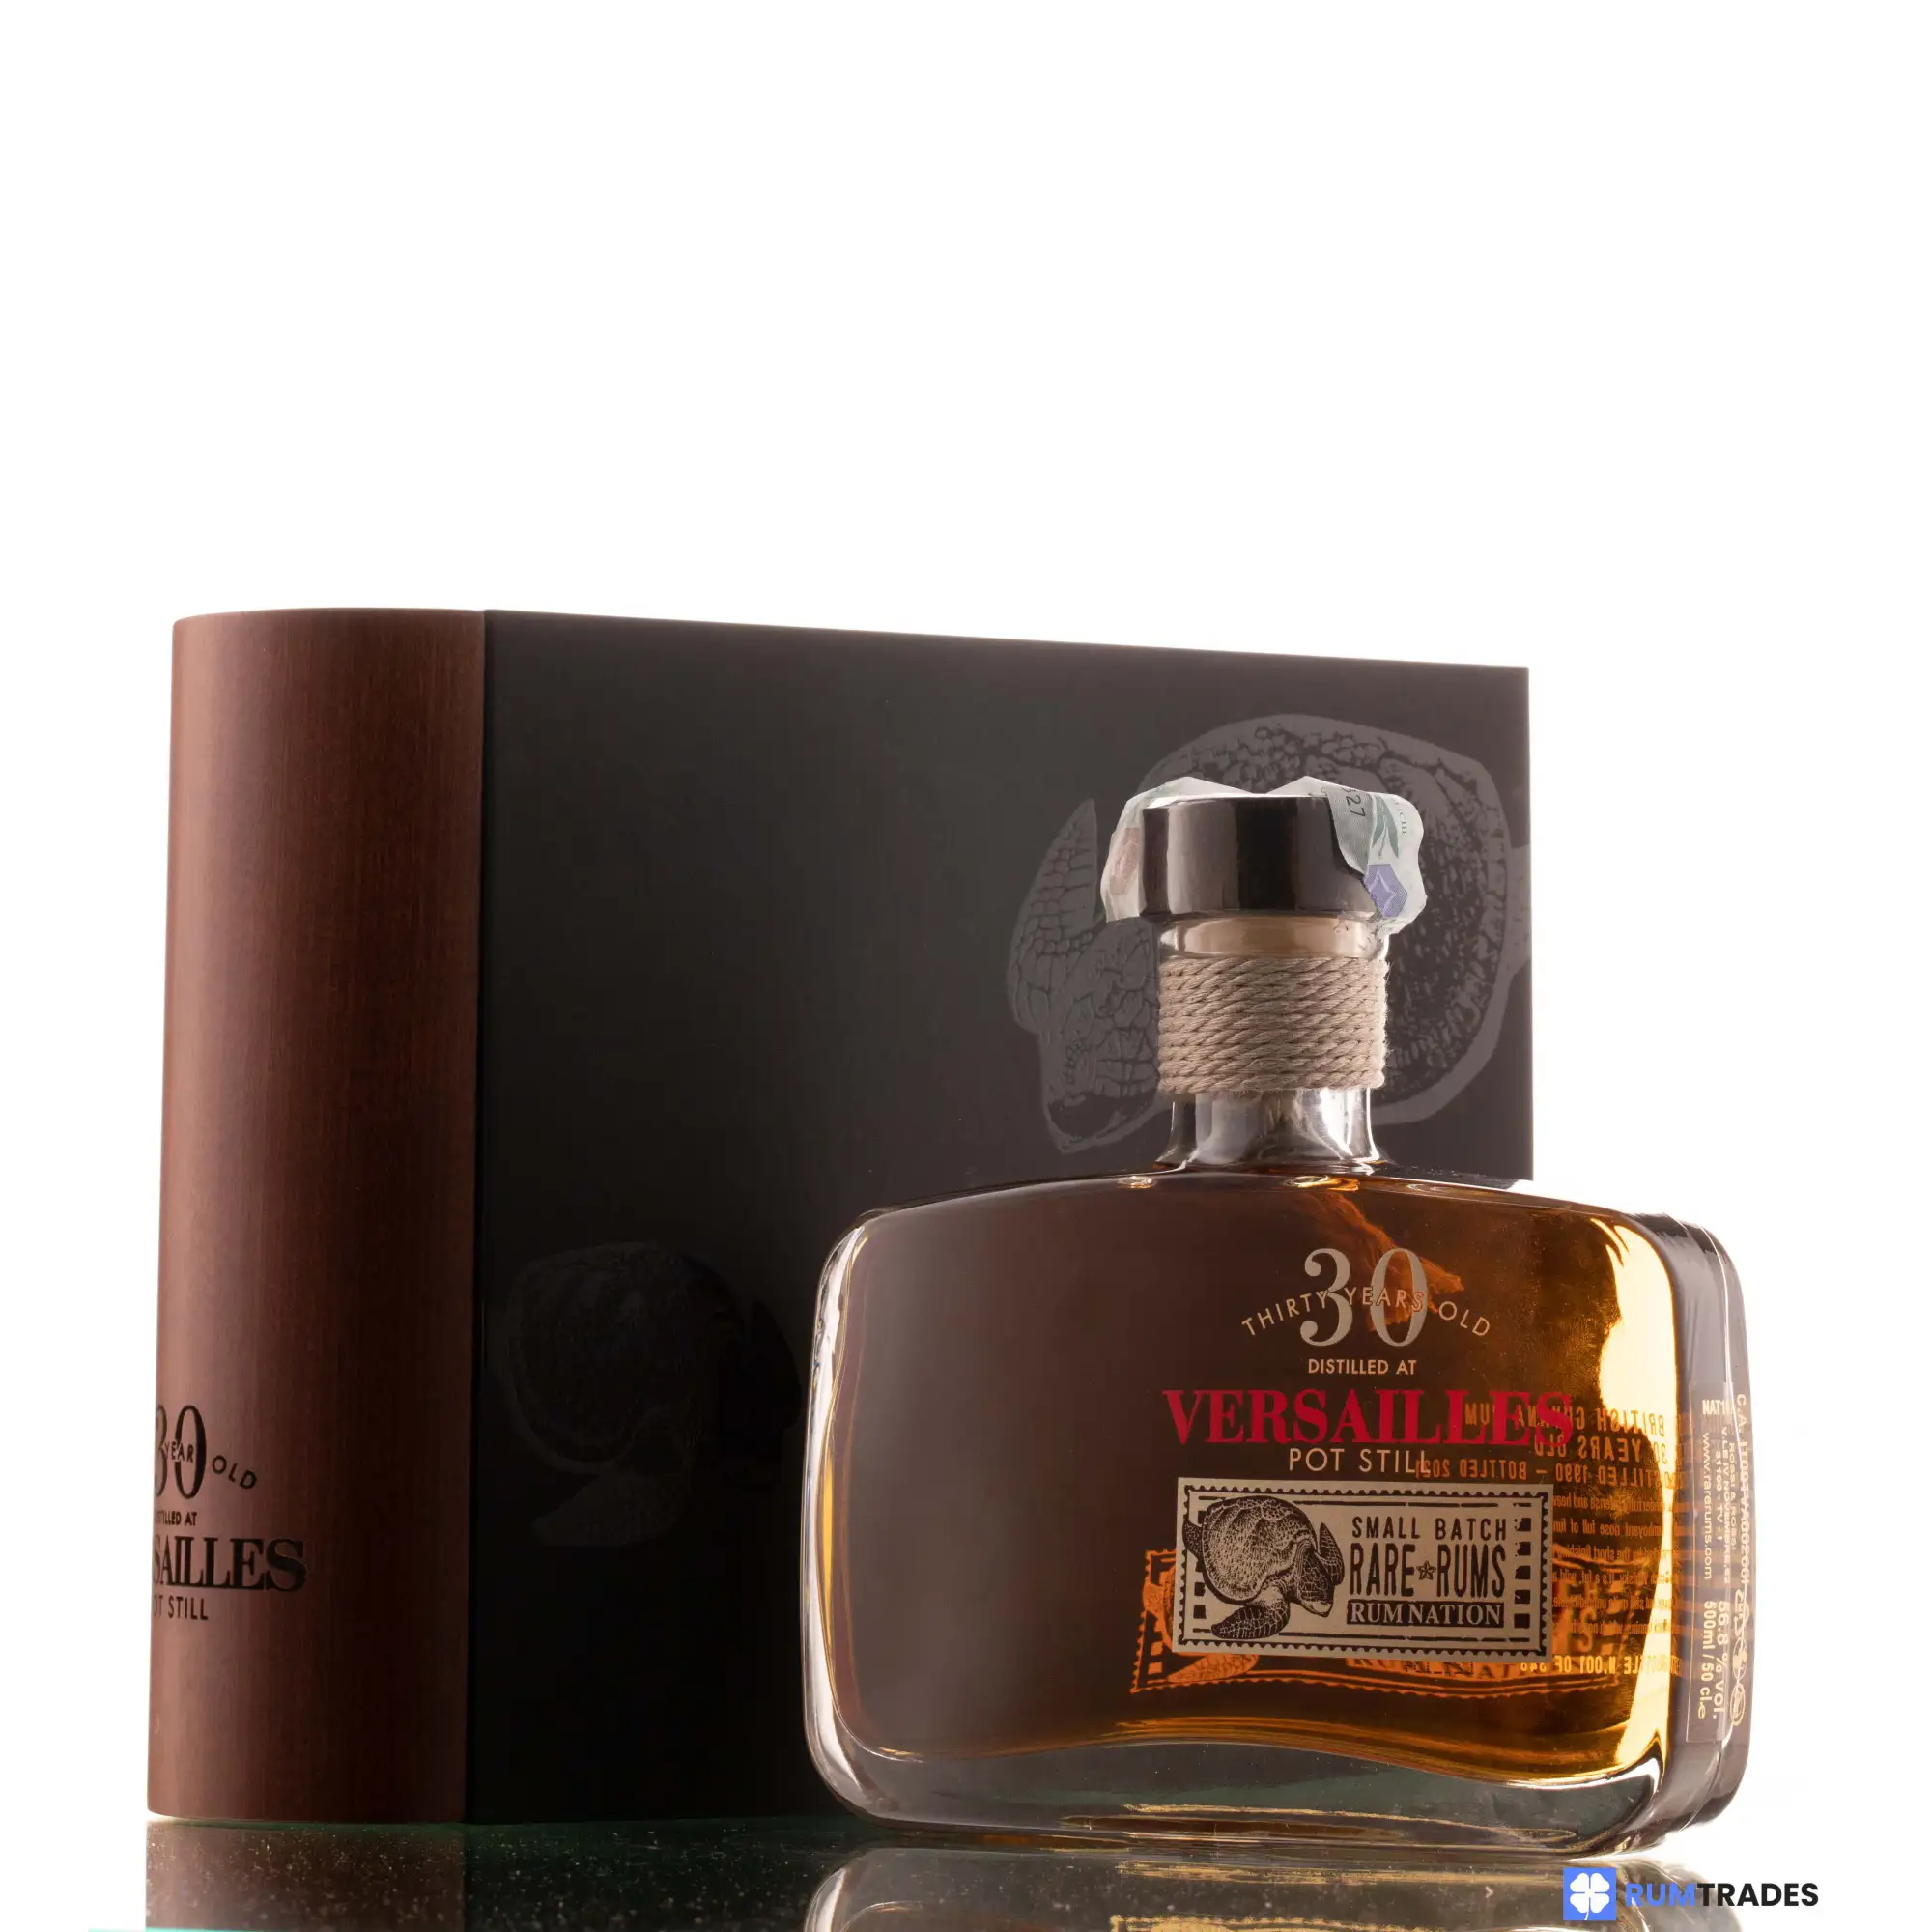 Image of the front of the bottle of the rum Demerara VSG